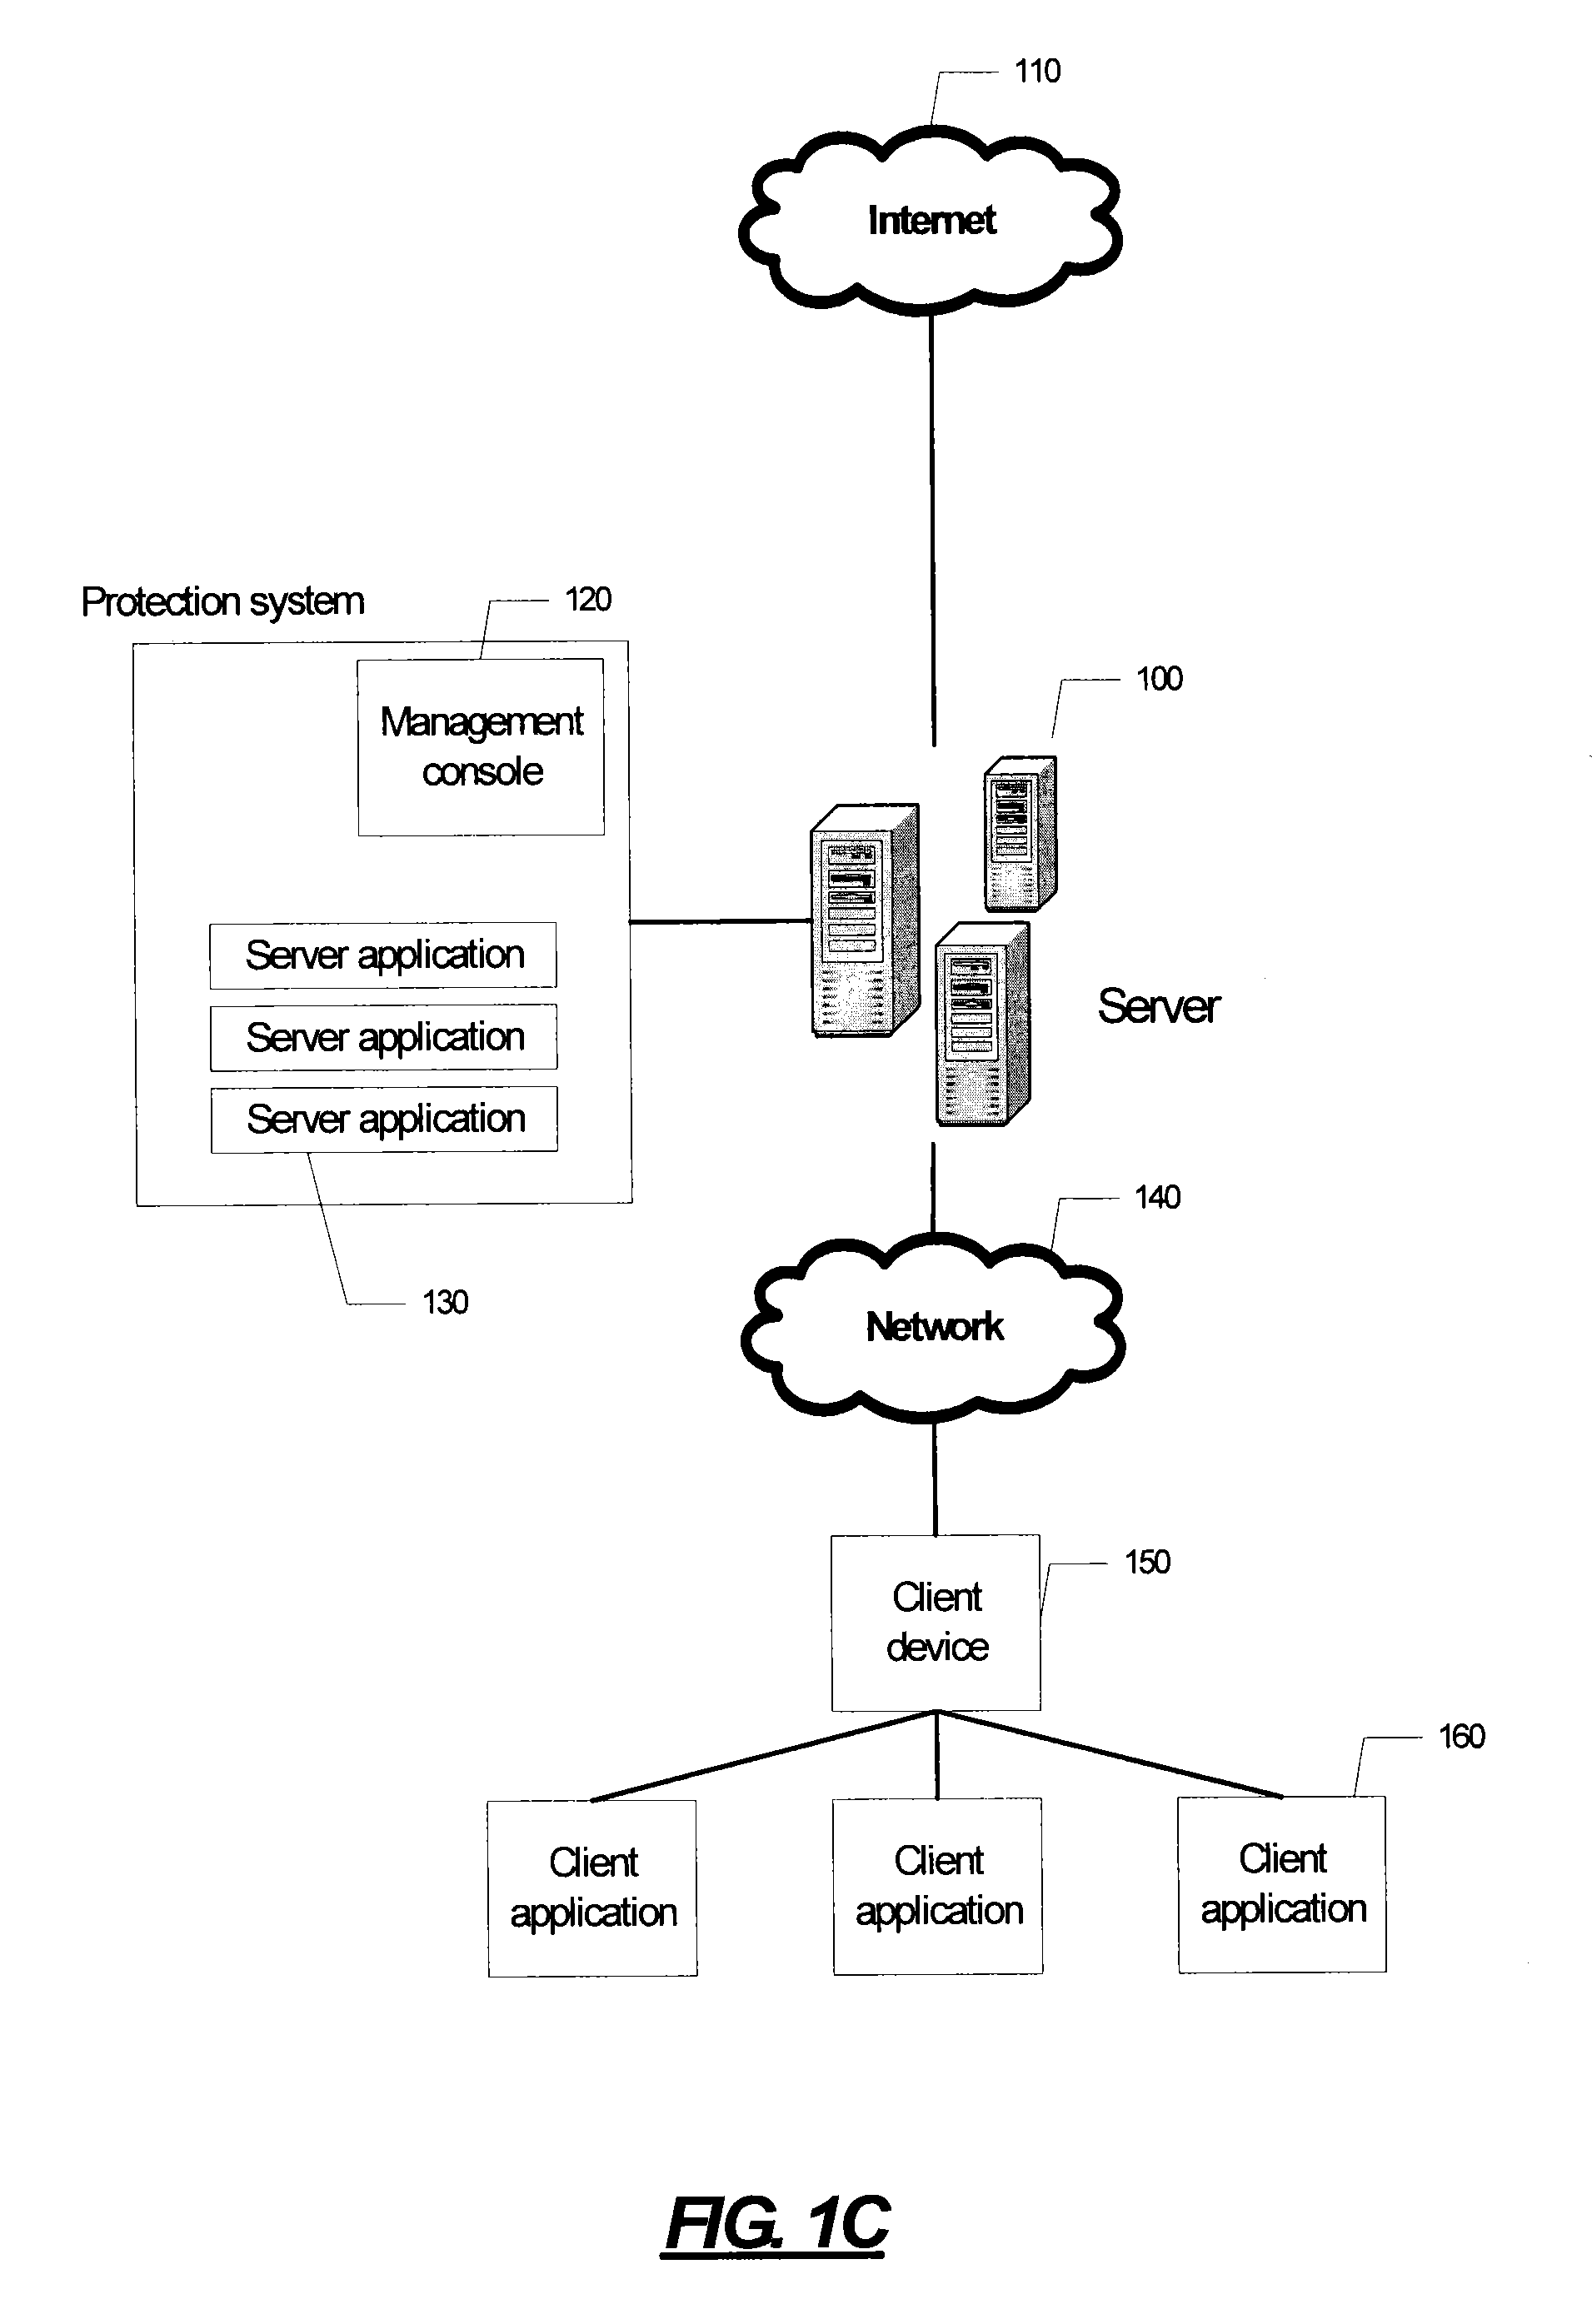 Team security for portable information devices